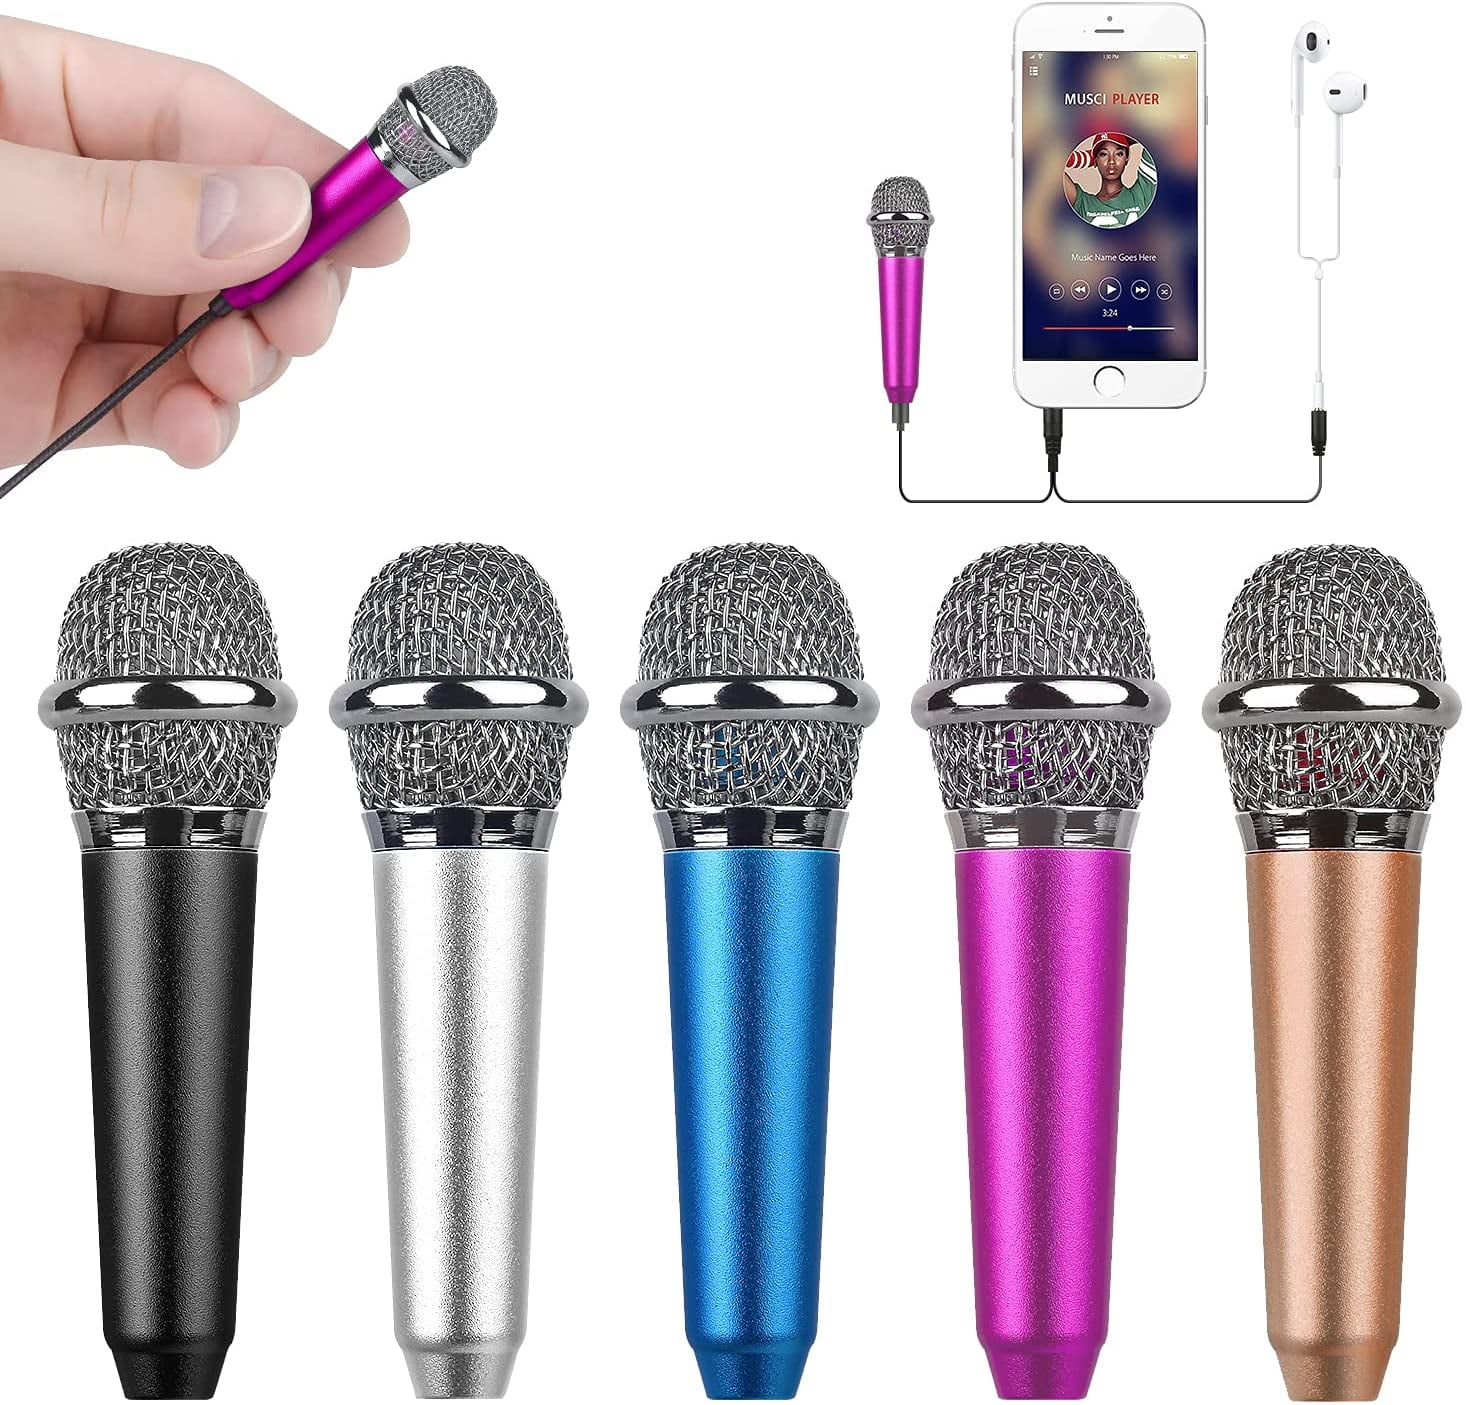 XGPA Mini Microphone Portable Vocal/Instrument Microphone For Mobile phone laptop Notebook Apple iPhone Samsung Android With Holder Clip Silver